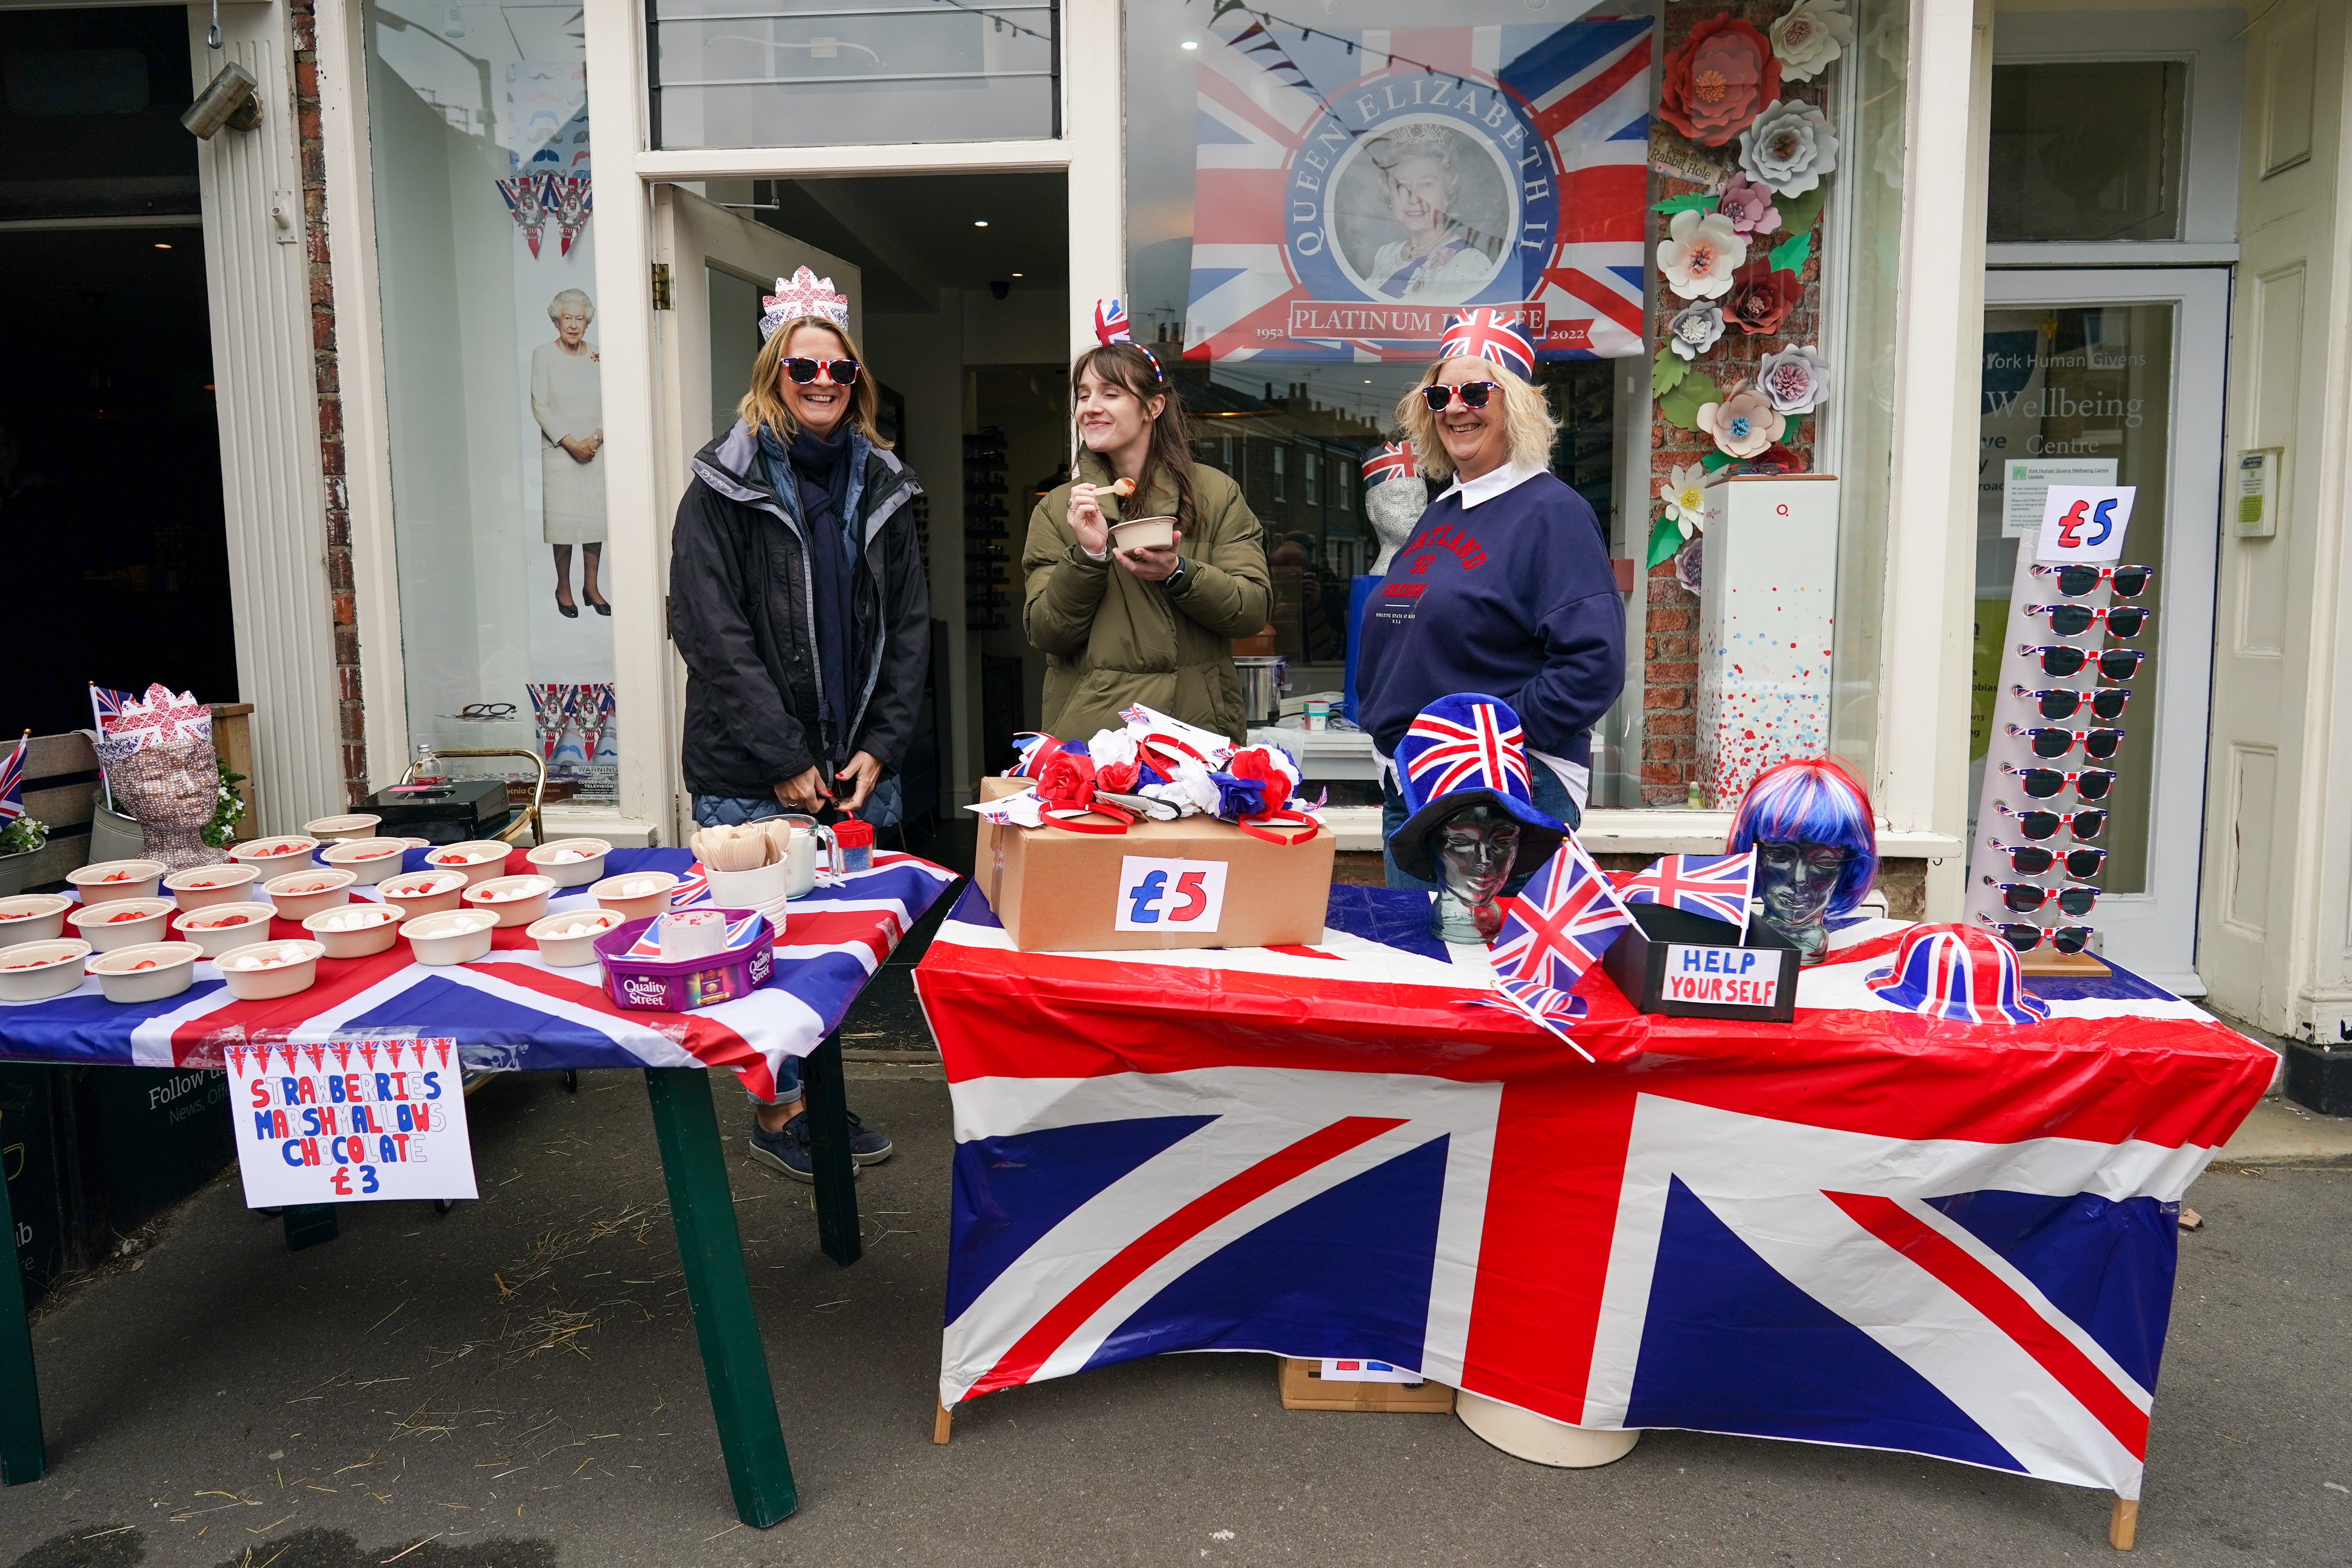 Shop owners join in with the fun during the Bishopthorpe Road Street Party celebrating the Queen’s platinum jubilee on 5 June 2022 in York